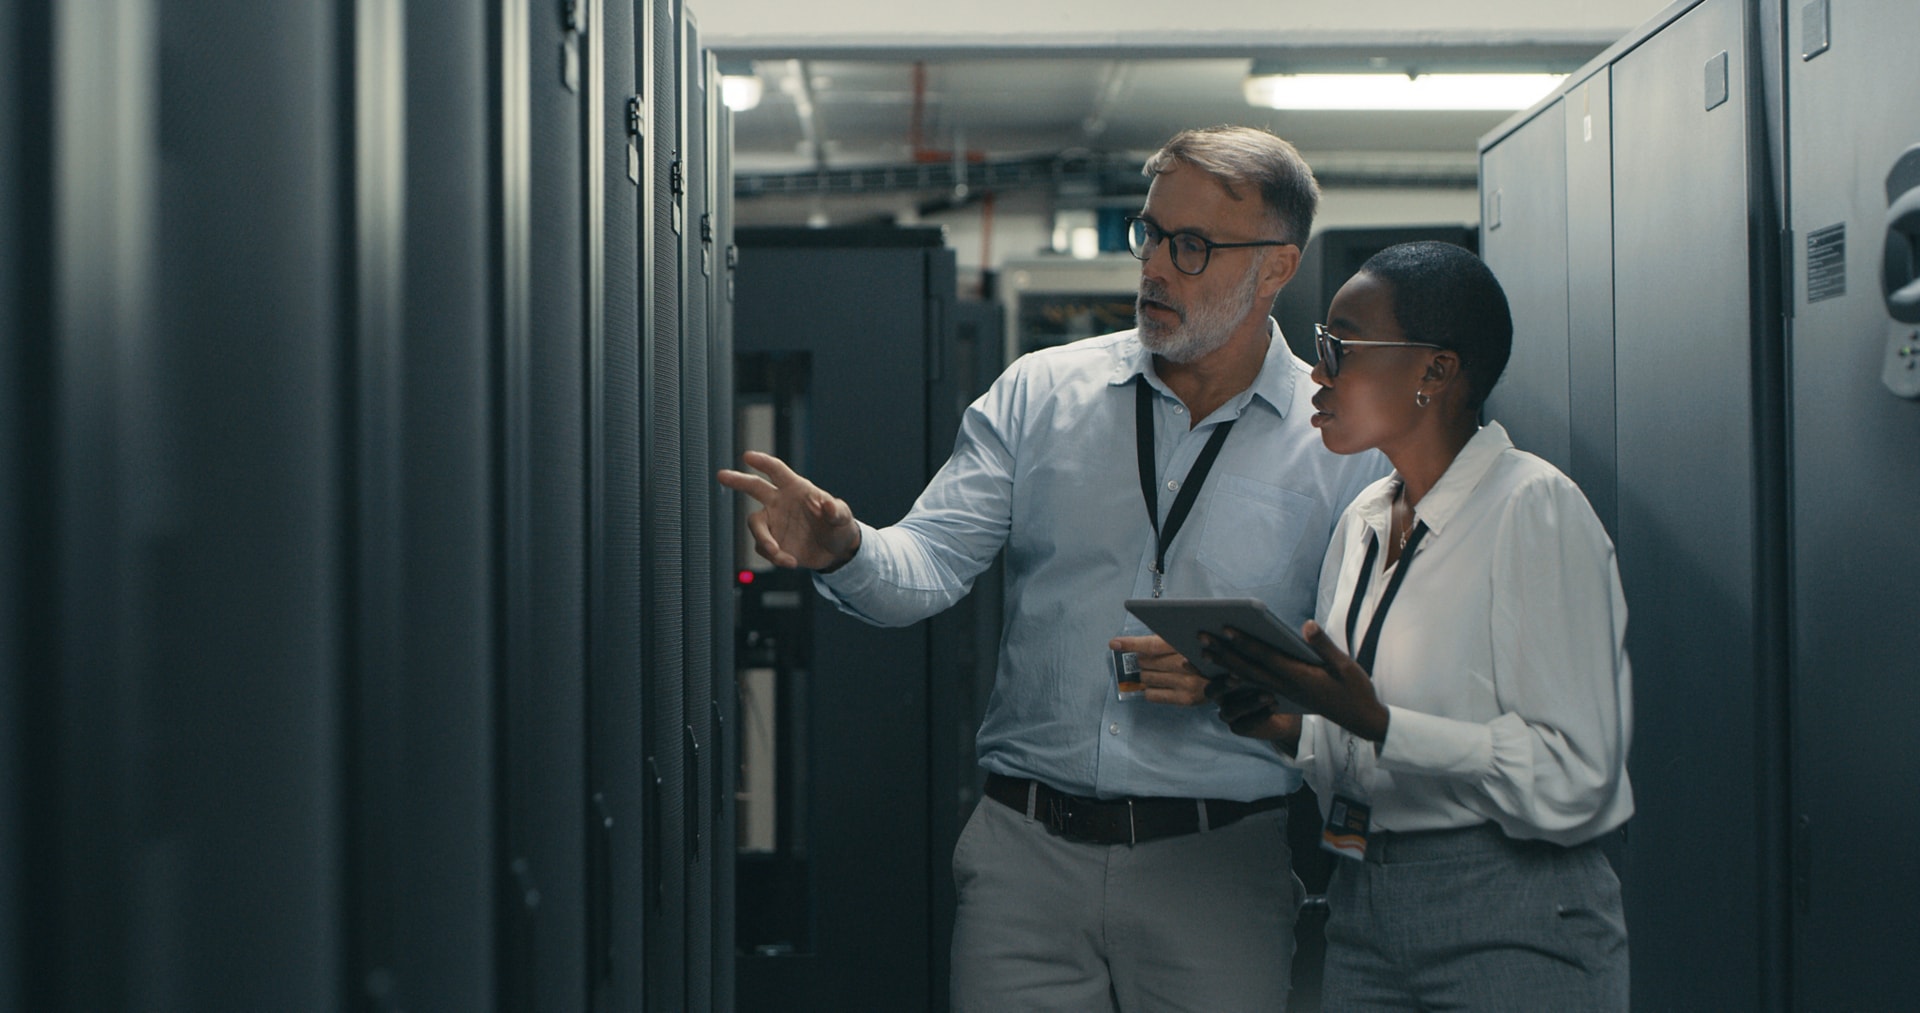 How to Make Your Data Centre More Energy Efficient